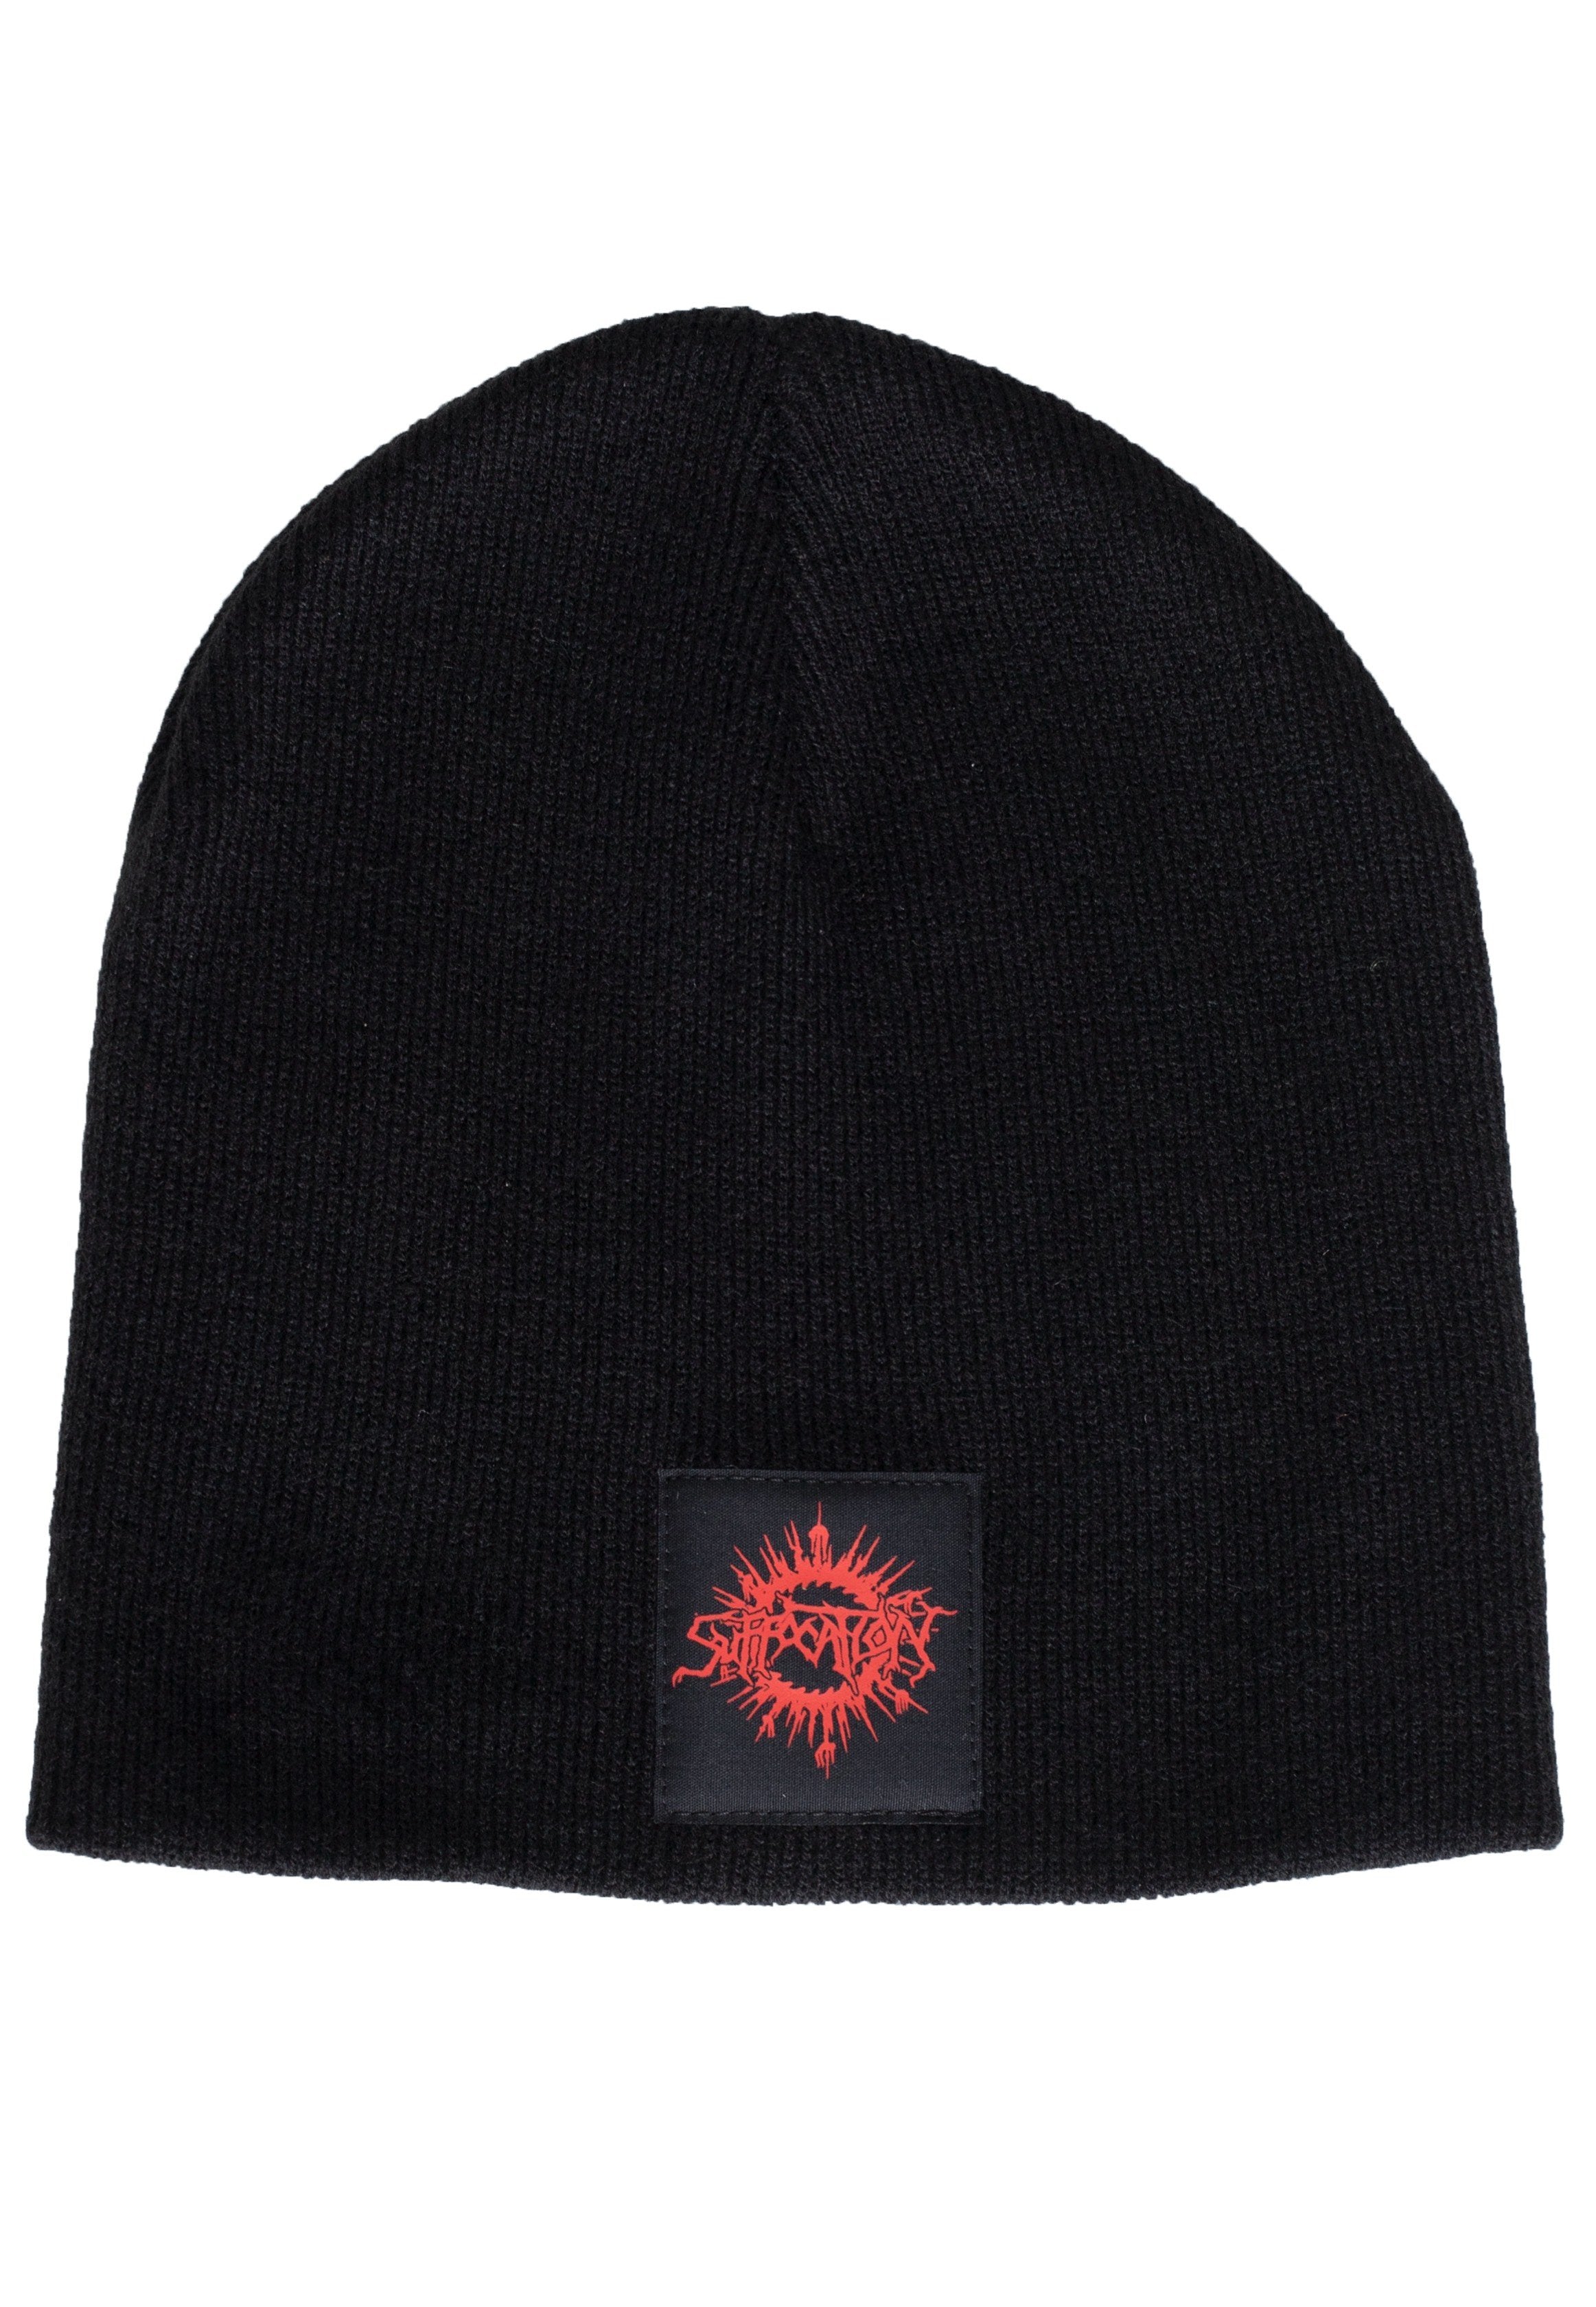 Suffocation - Pull On Logo - Beanie